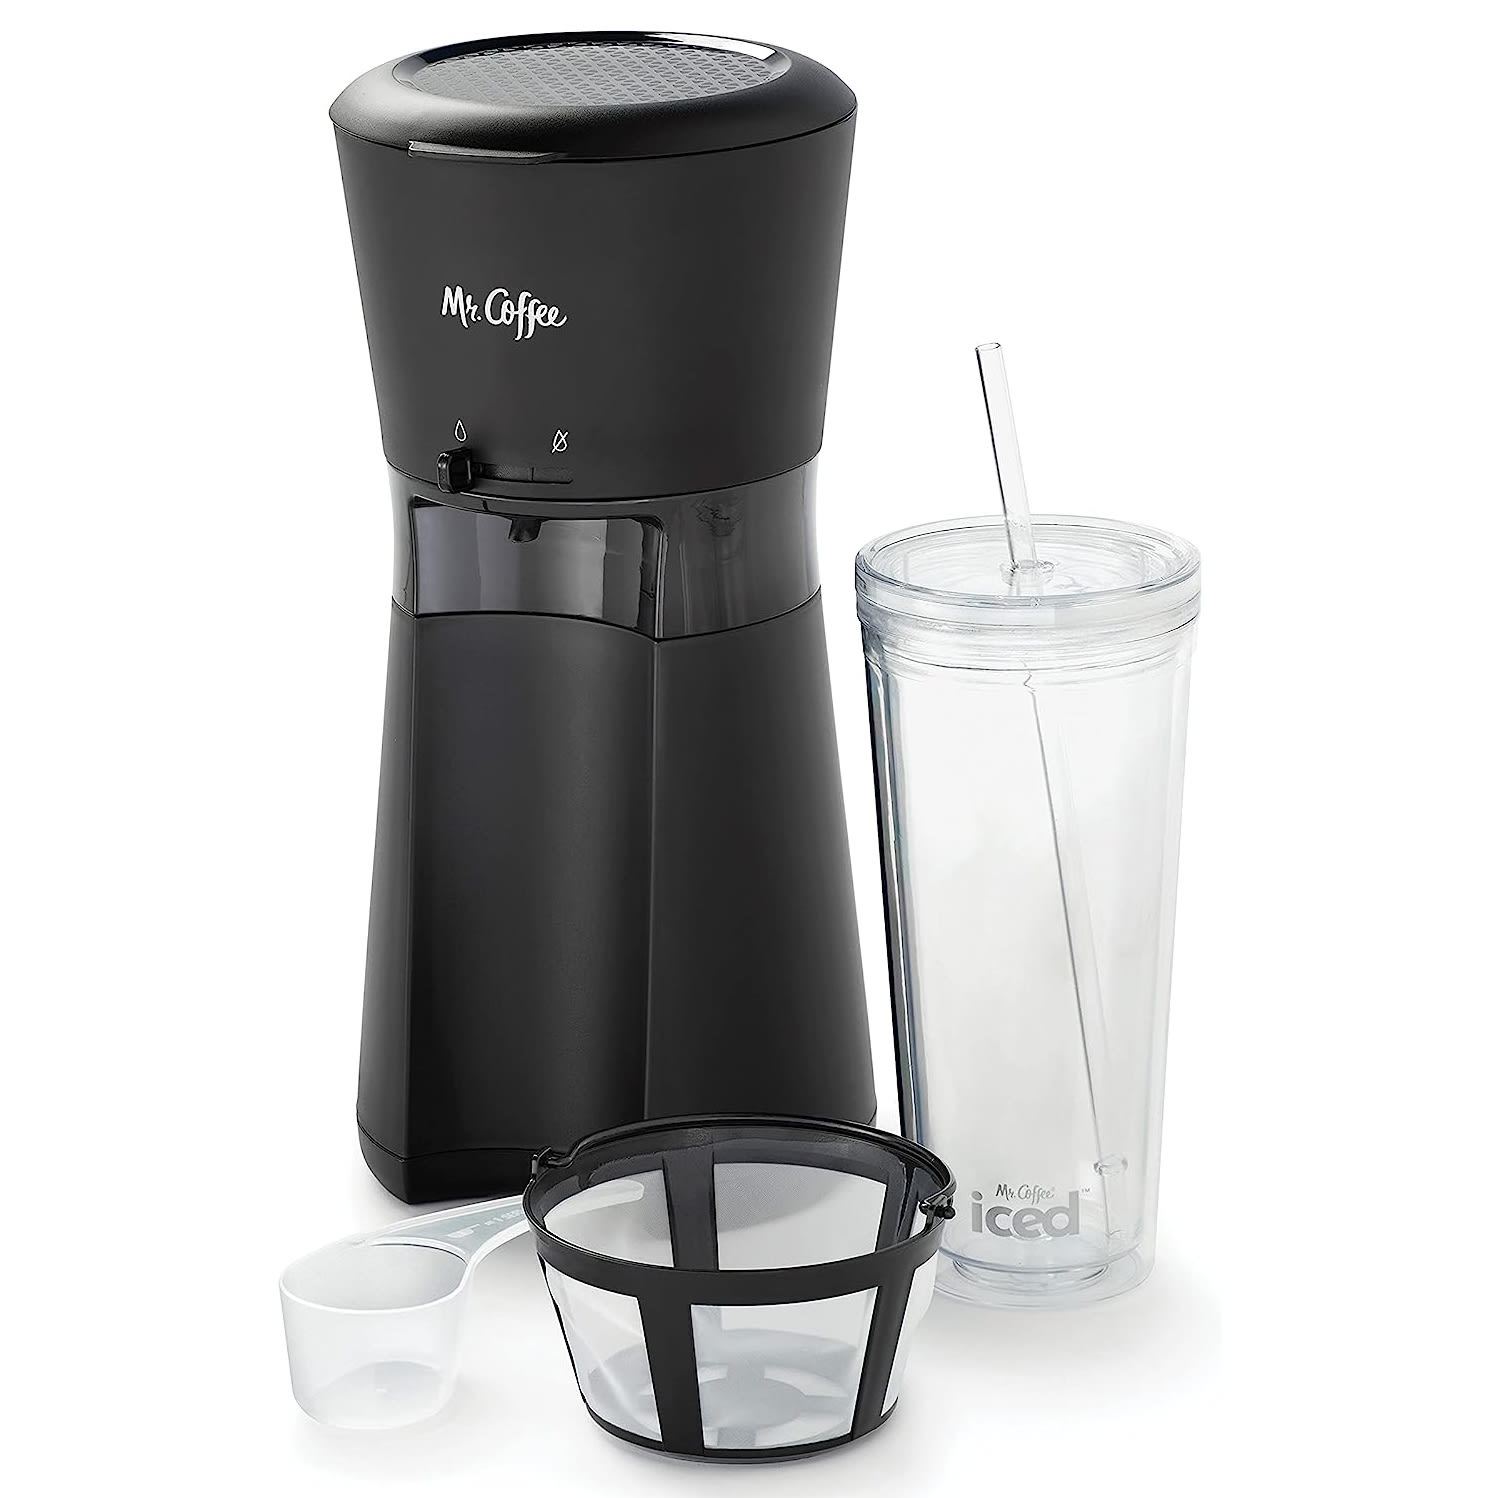 http://cdn.apartmenttherapy.info/image/upload/v1688408630/gen-workflow/product-database/mr-coffee-iced-coffee-maker-amazon.jpg